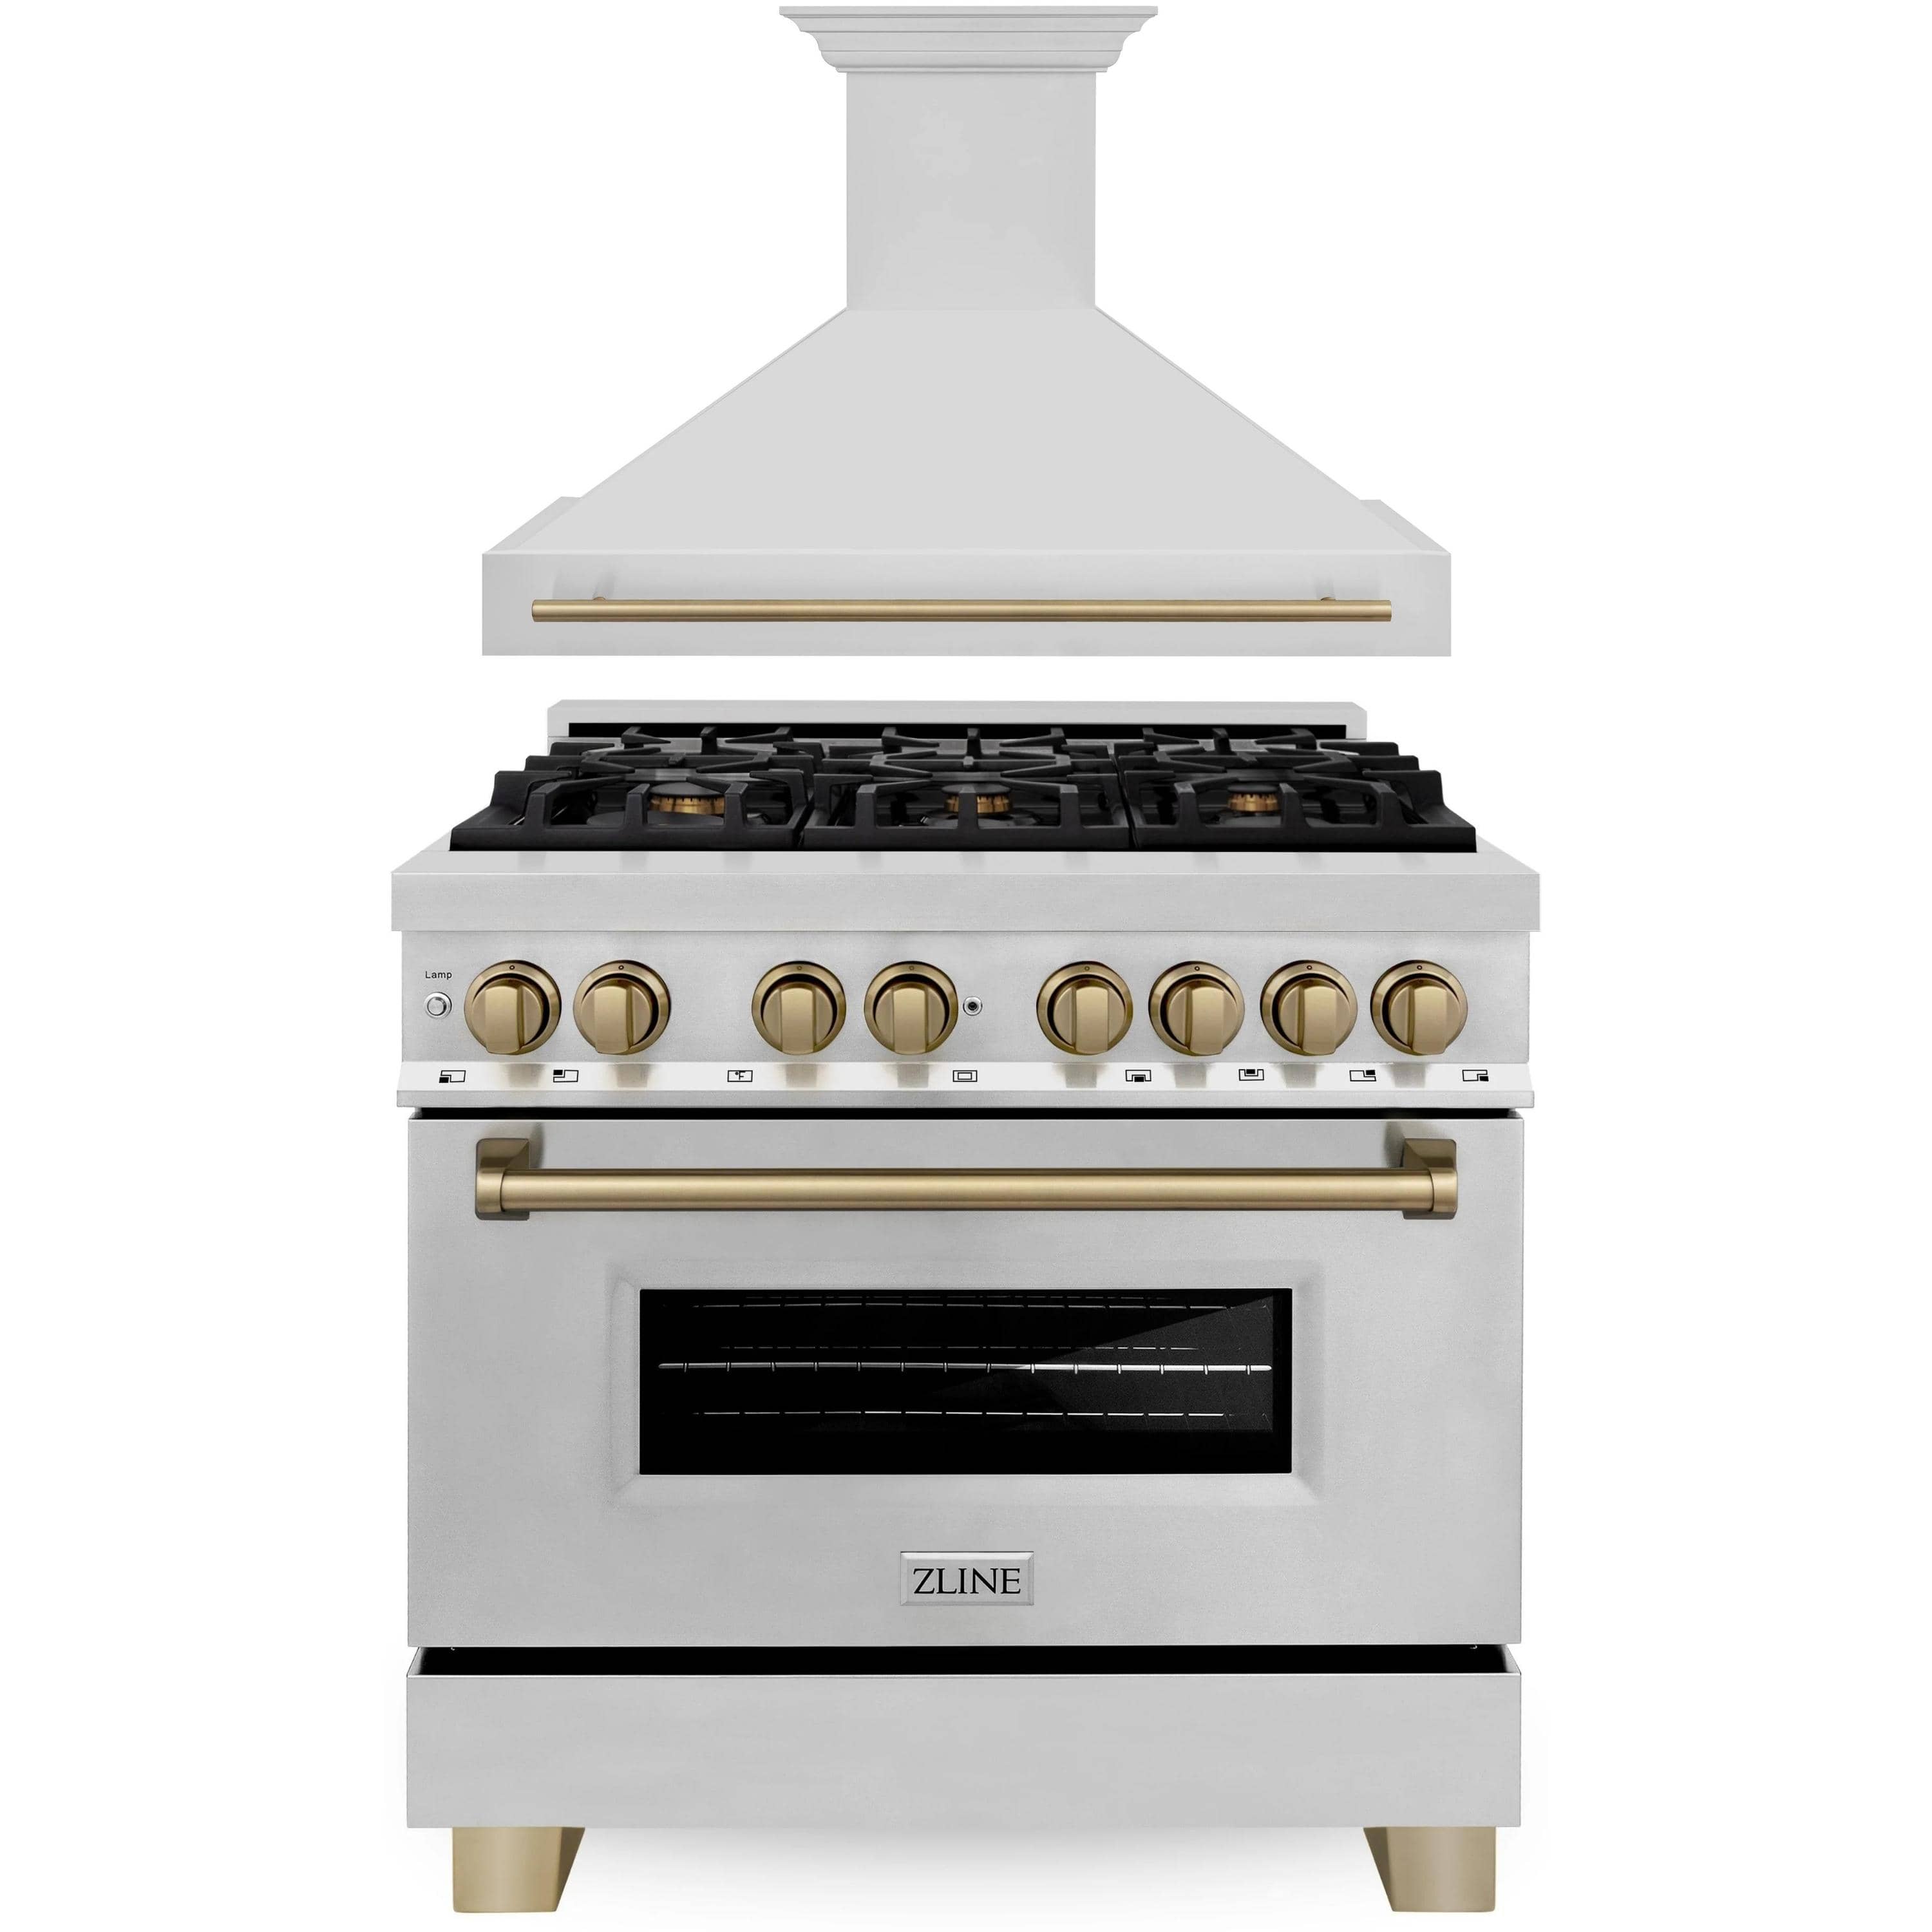 ZLINE Autograph Edition 2-Piece Appliance Package - 36-Inch Dual Fuel Range and Wall Mounted Range Hood in Stainless Steel with Champagne Bronze Trim (2AKP-RARH36-CB)